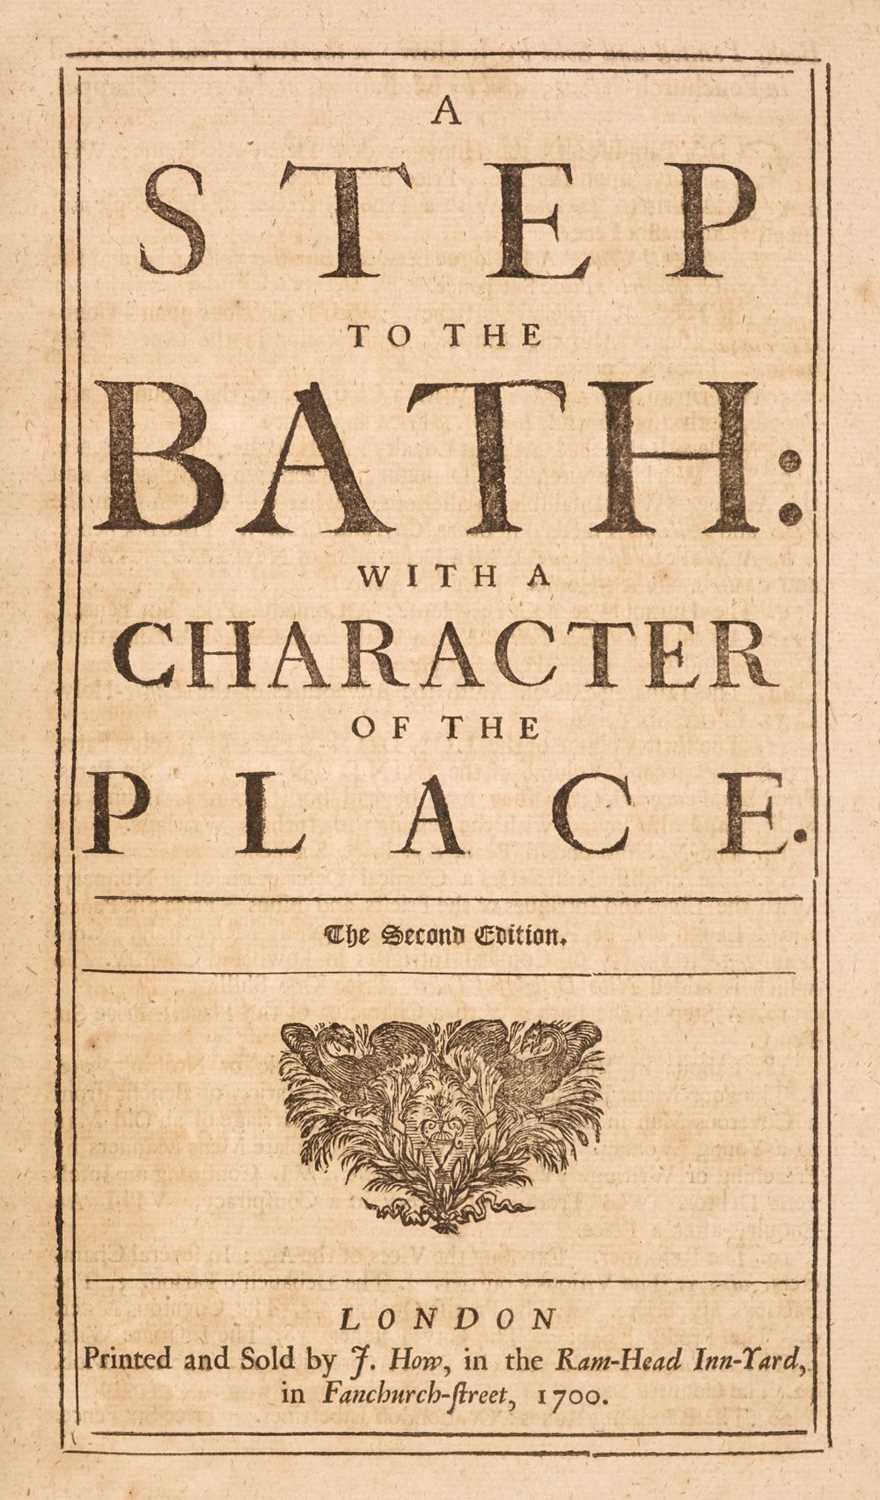 Lot 79 - Ward (Edward). A step to the Bath: with a character of the place, 2nd edition, 1700